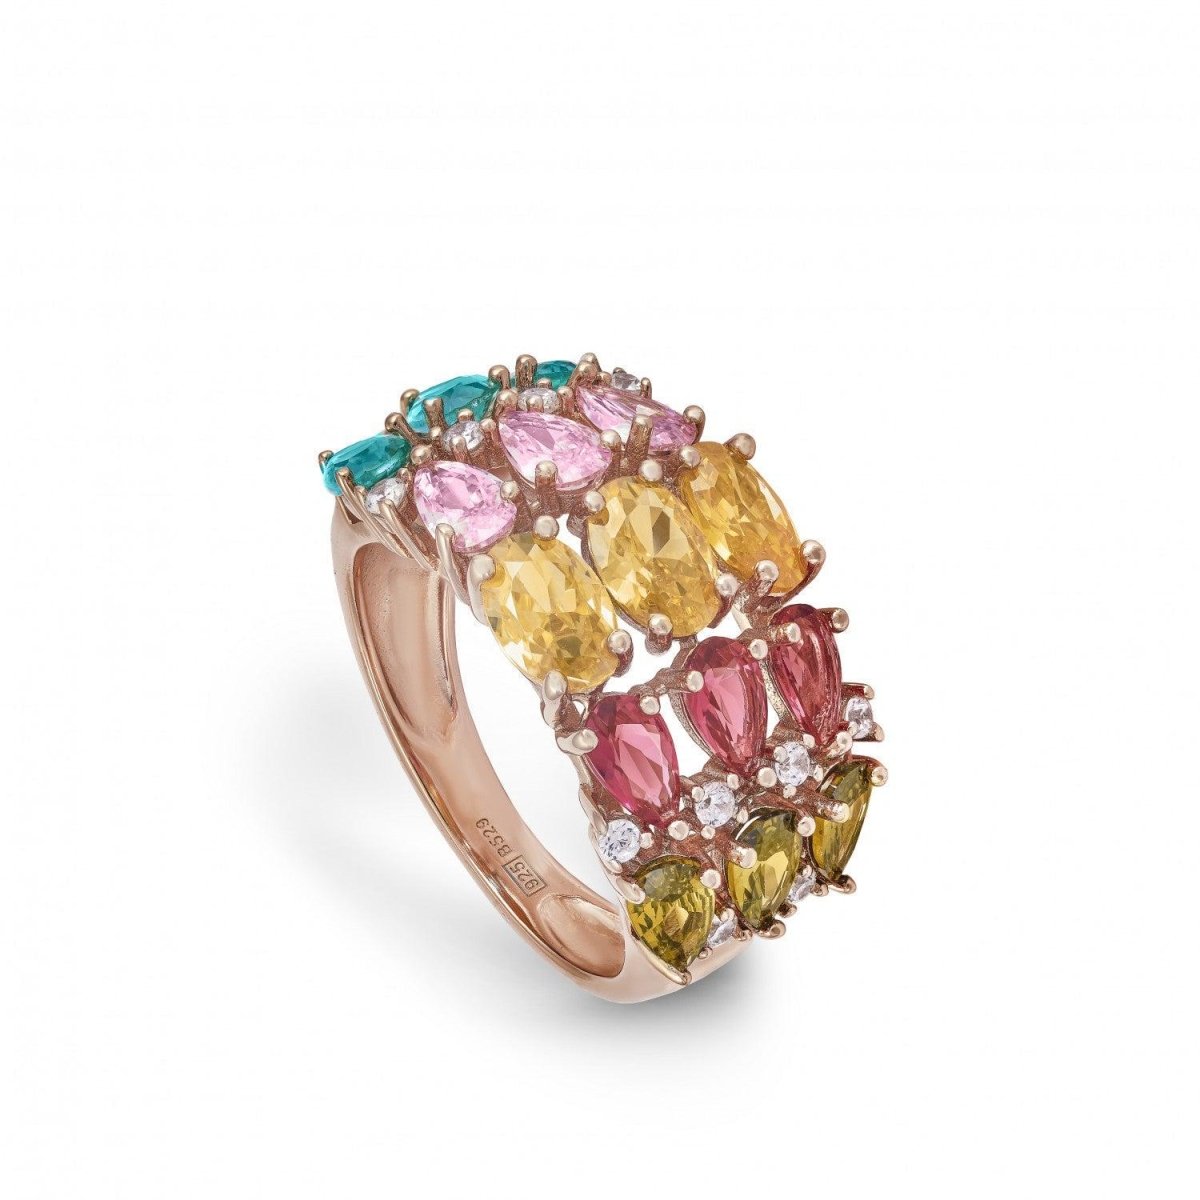 Ring - Rings with colored stones and bow in cool tones